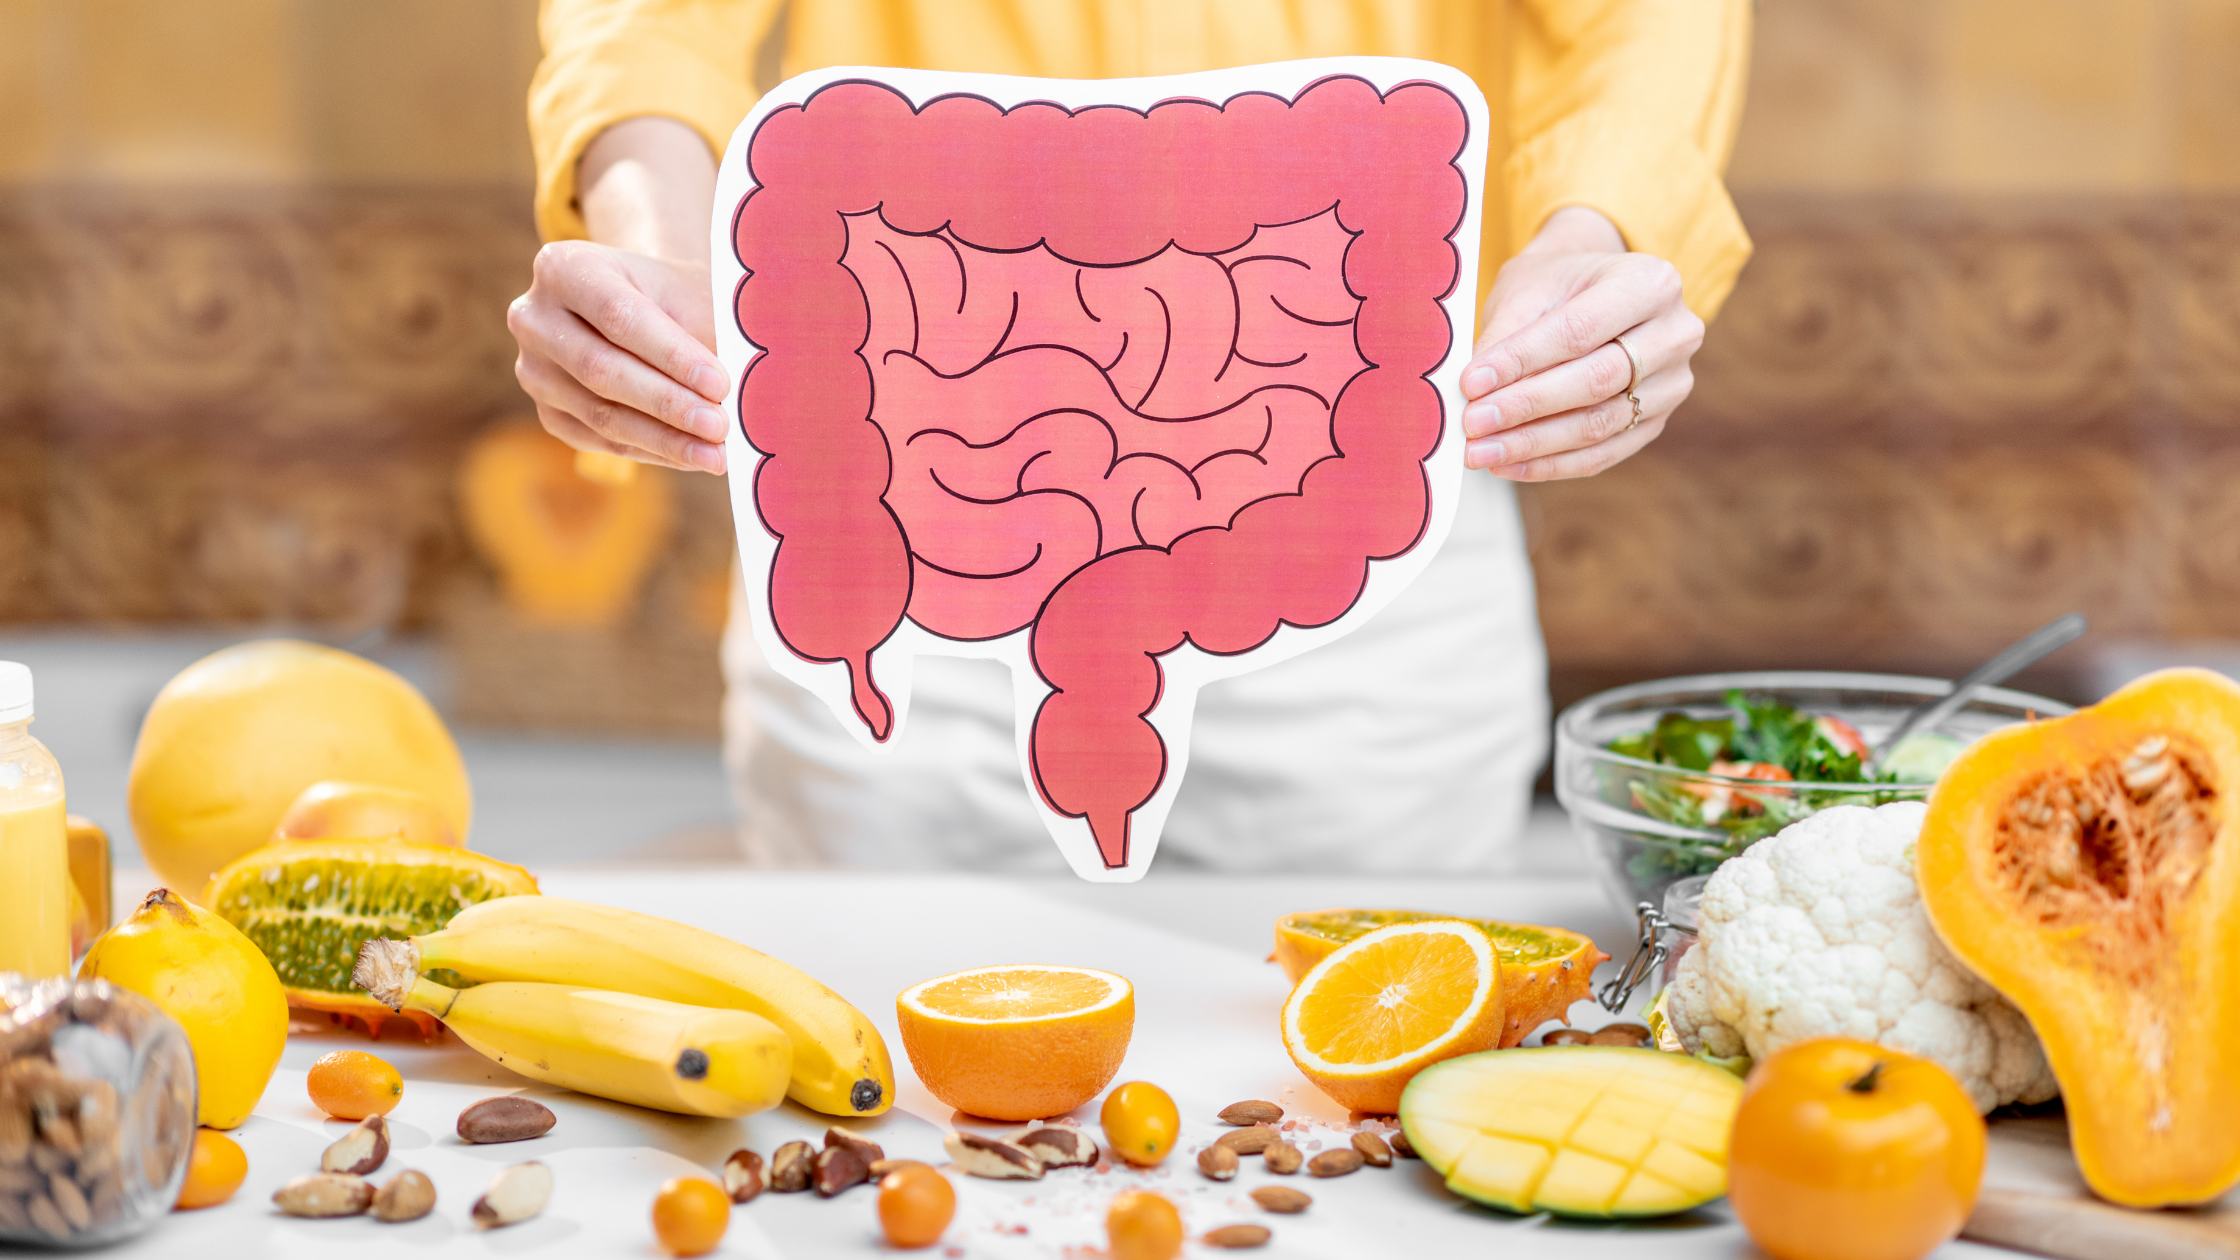 Woman holds a cardboard cutout illustrating the digestive tract over a table with various fruits, vegetables, and nuts